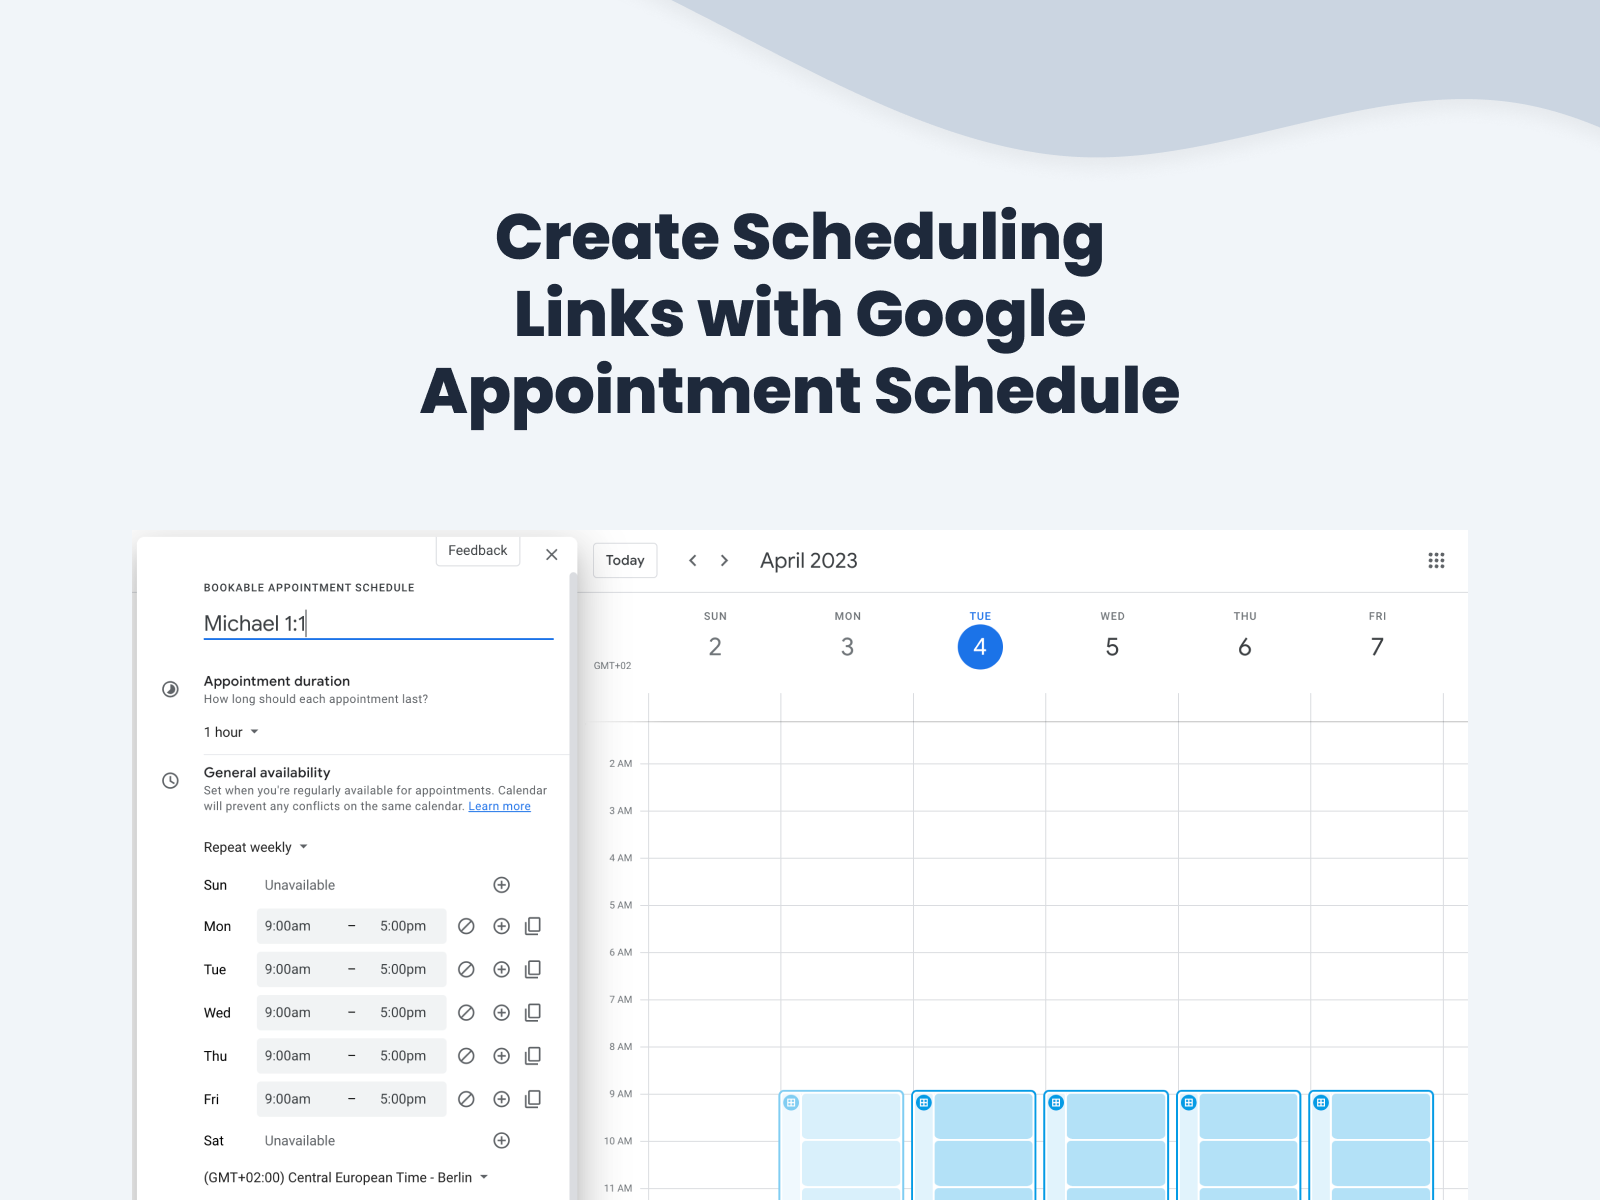 How to use Google Calendar Appointment Schedule to Create Scheduling